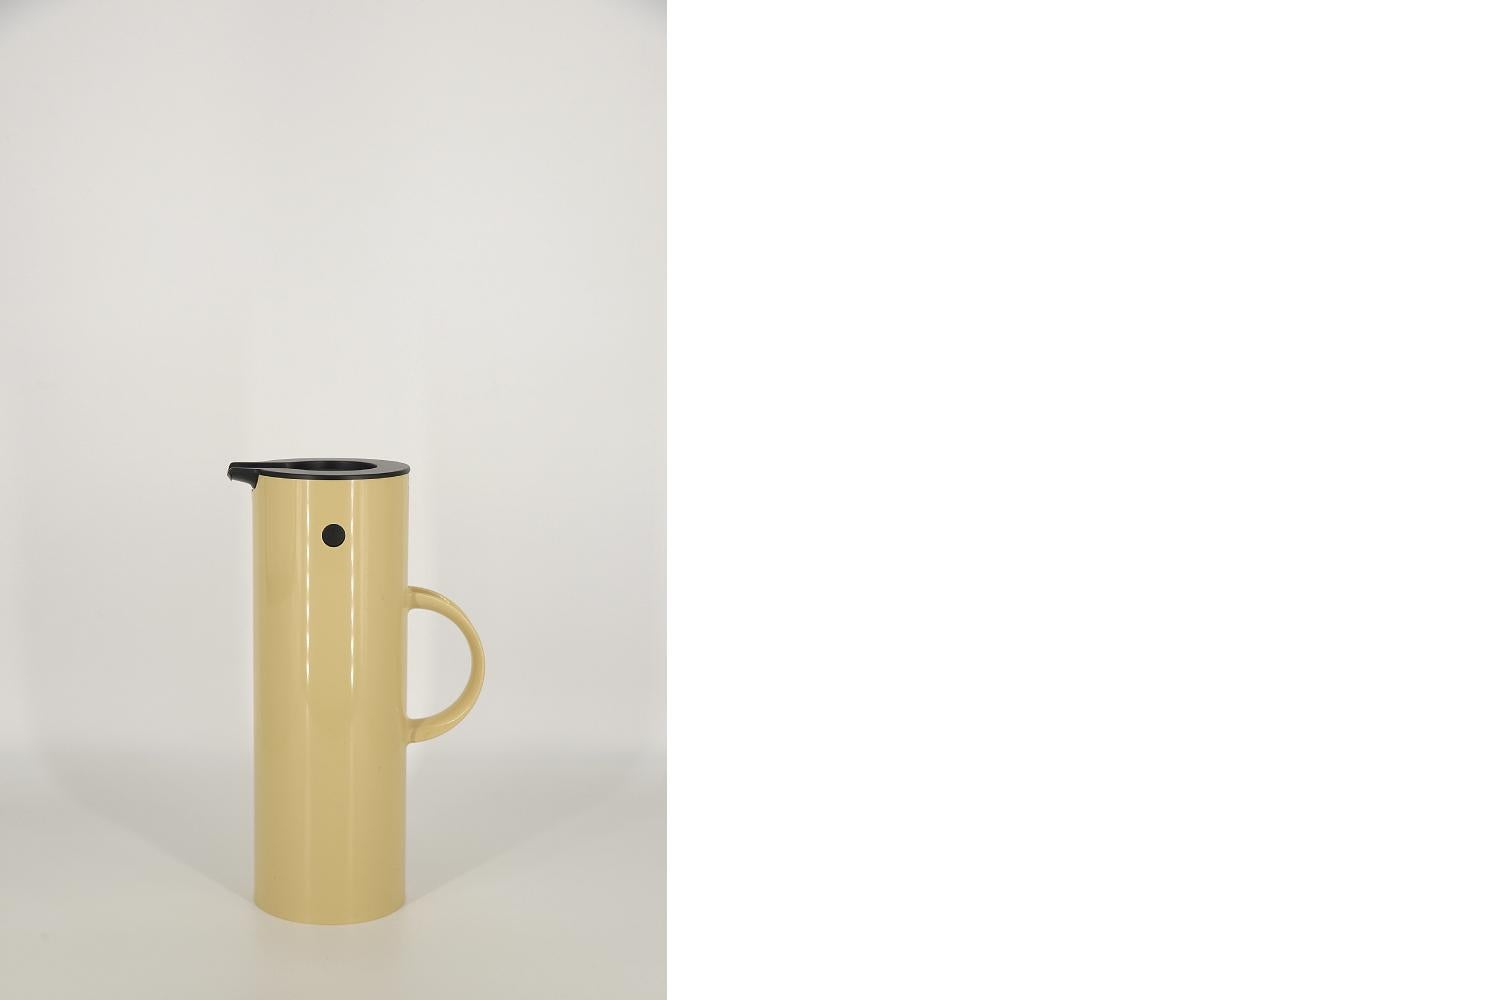 This vacuum jug was designed by Erik Magnussen for the Danish Stelton manufacture in 1976. Cataloged under name EM77. It has been an award-winning design icon since 1977 and consistently one of Stelton's bestsellers. It is one of the company's